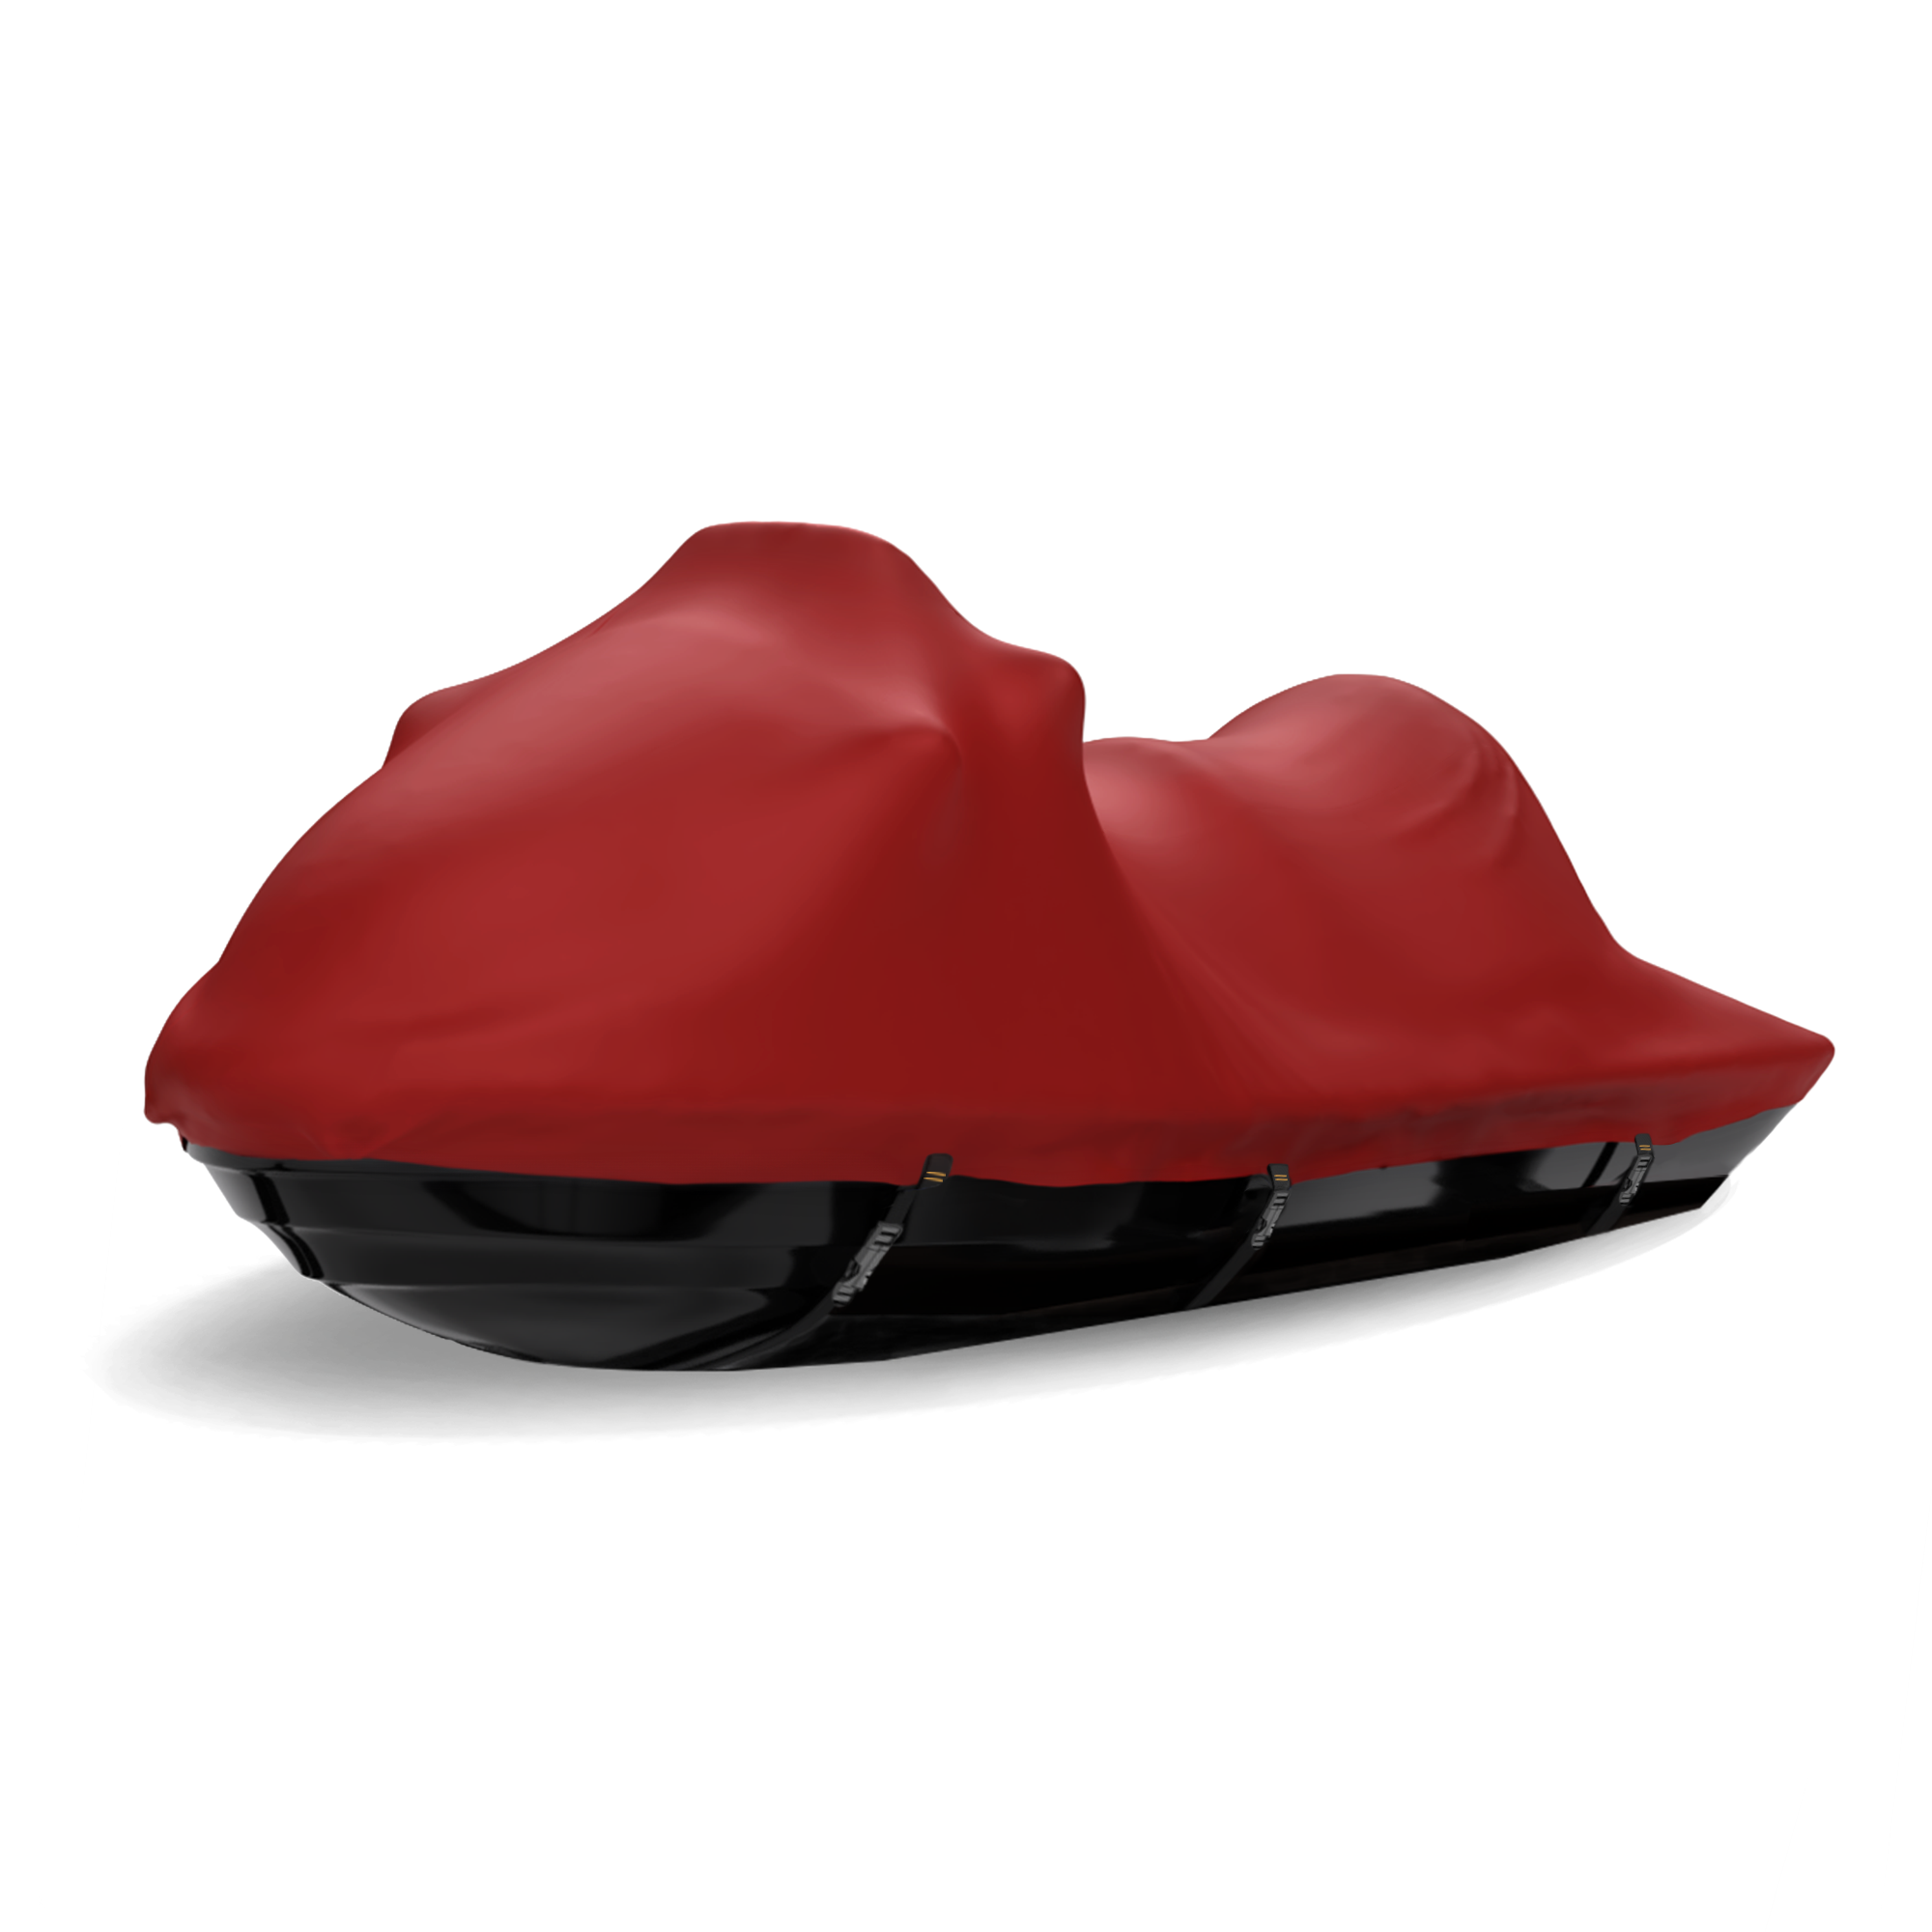 Weatherproof MAX Shield Jet Ski Cover (Trailerable) [Solid Red]